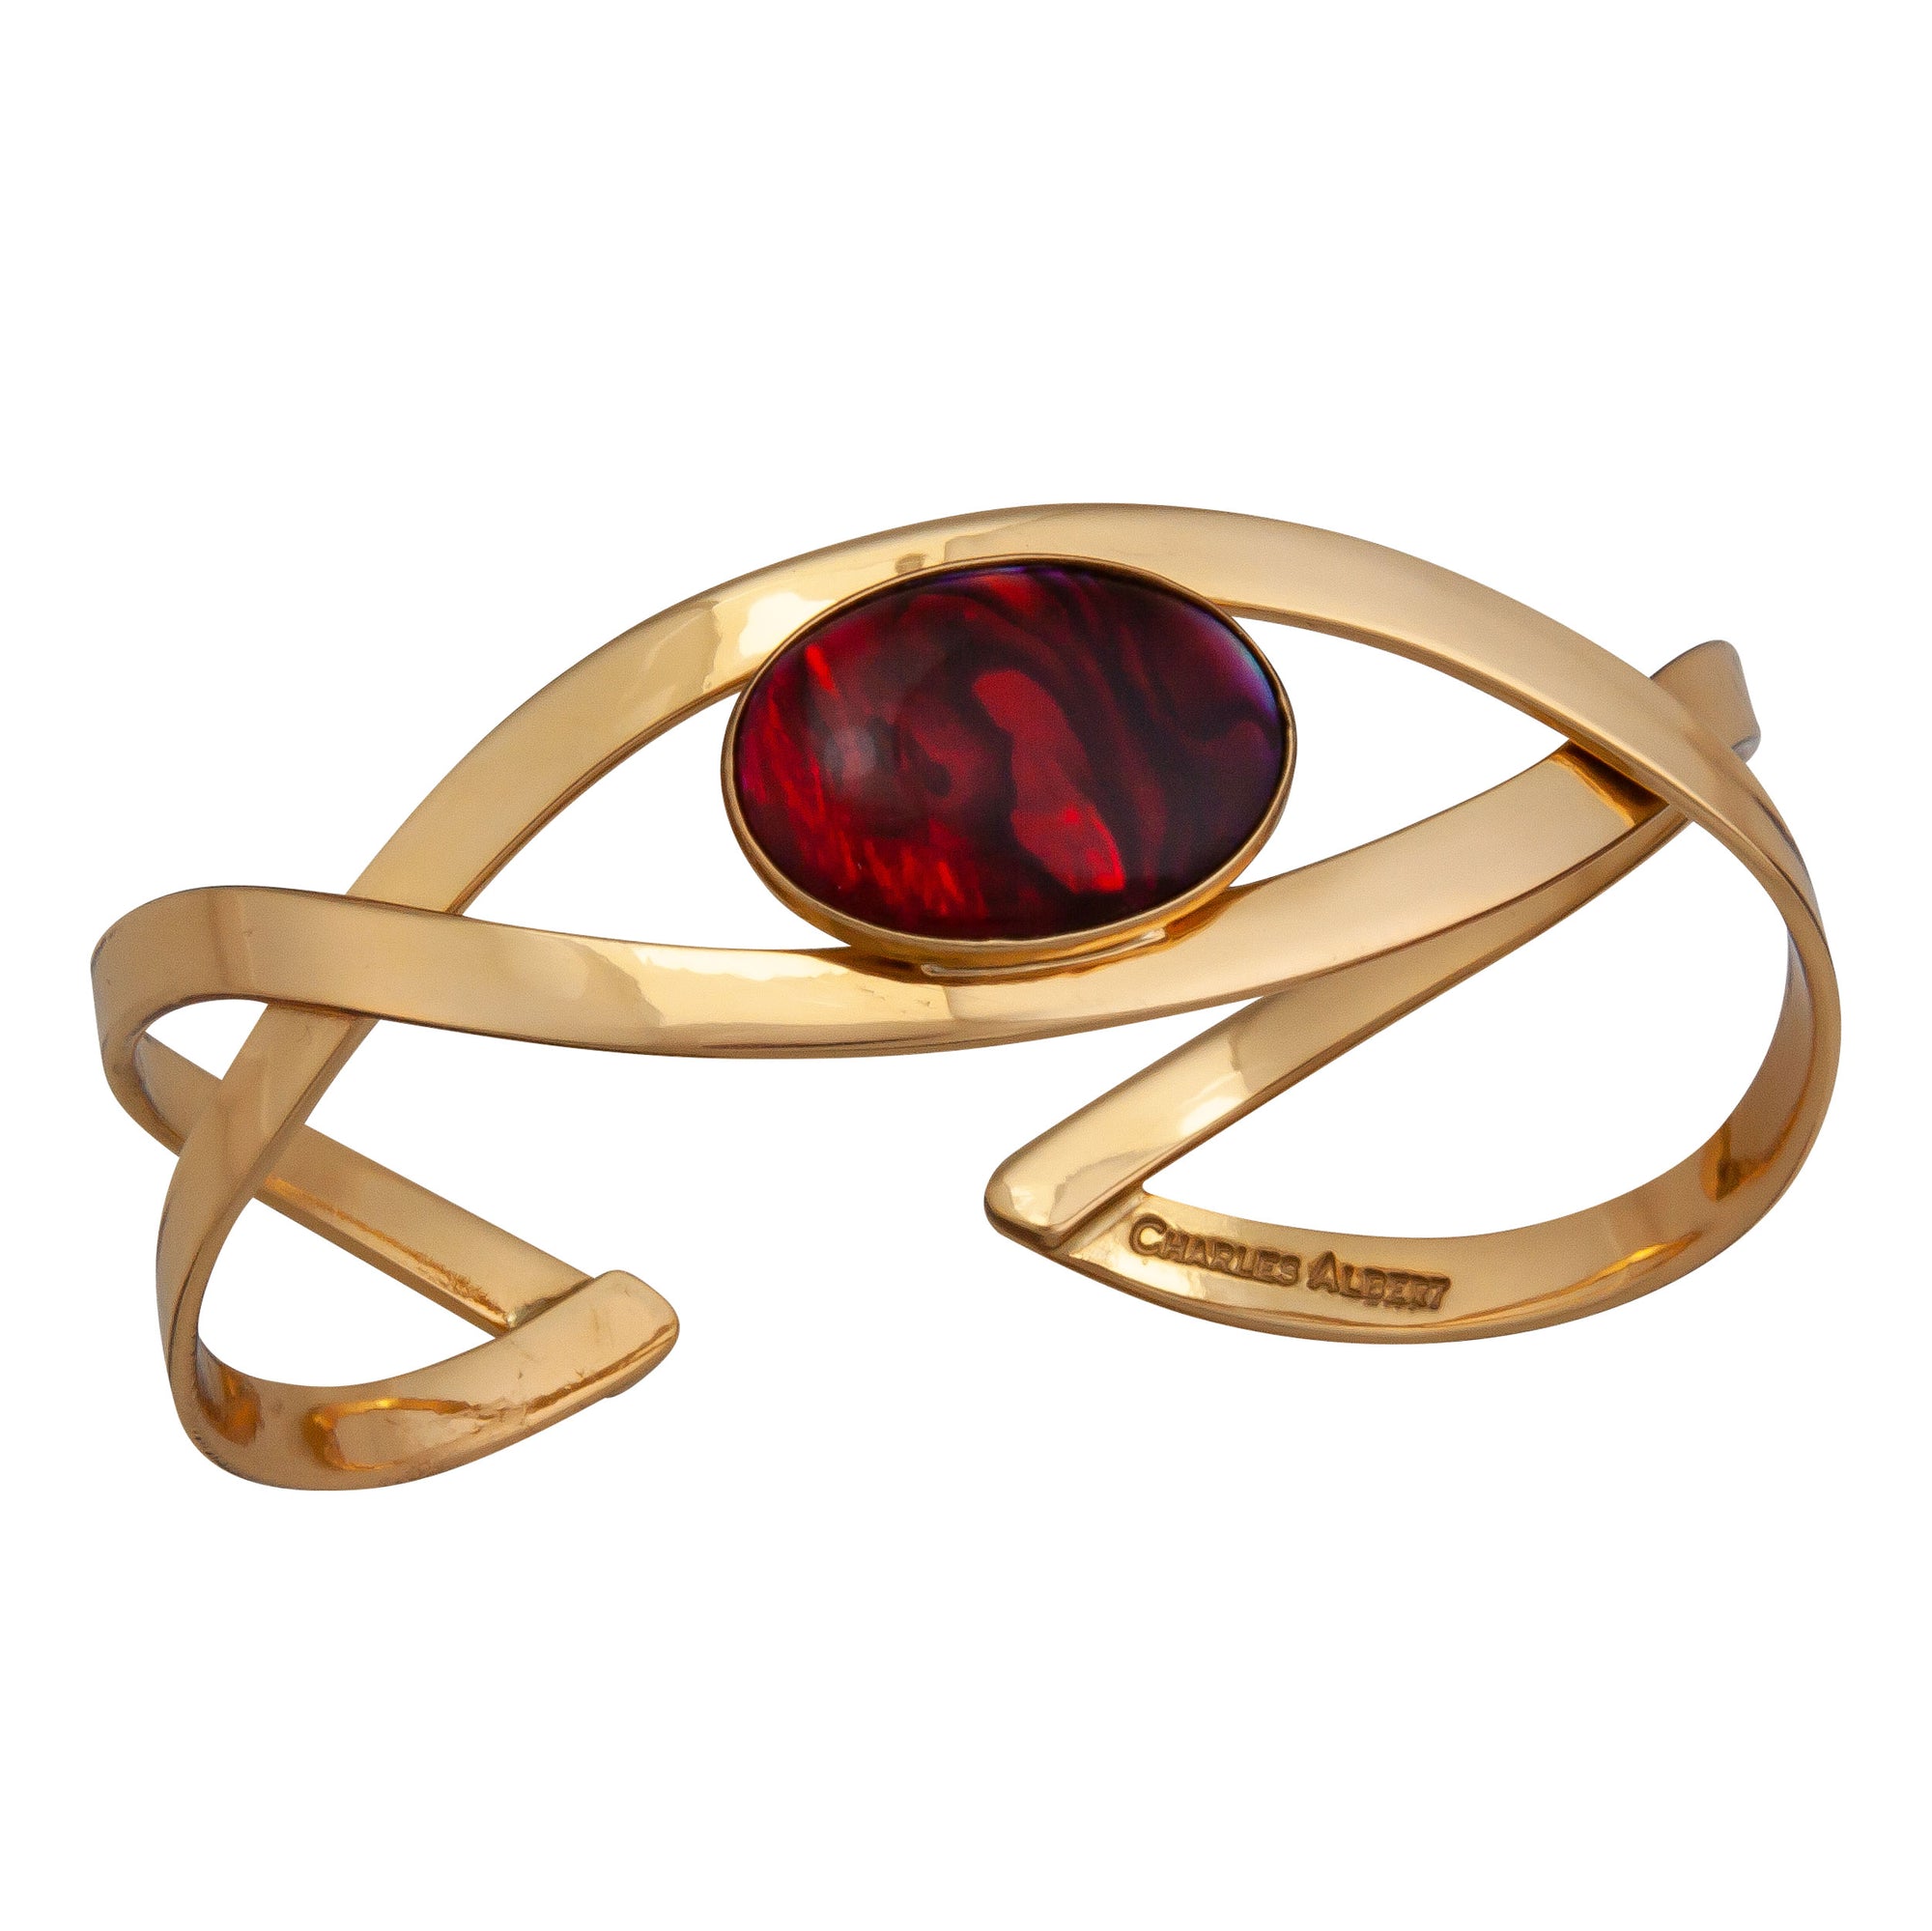 Charles Albert Jewelry - Alchemia Red Abalone Infinity Cuff Bracelet - Front View